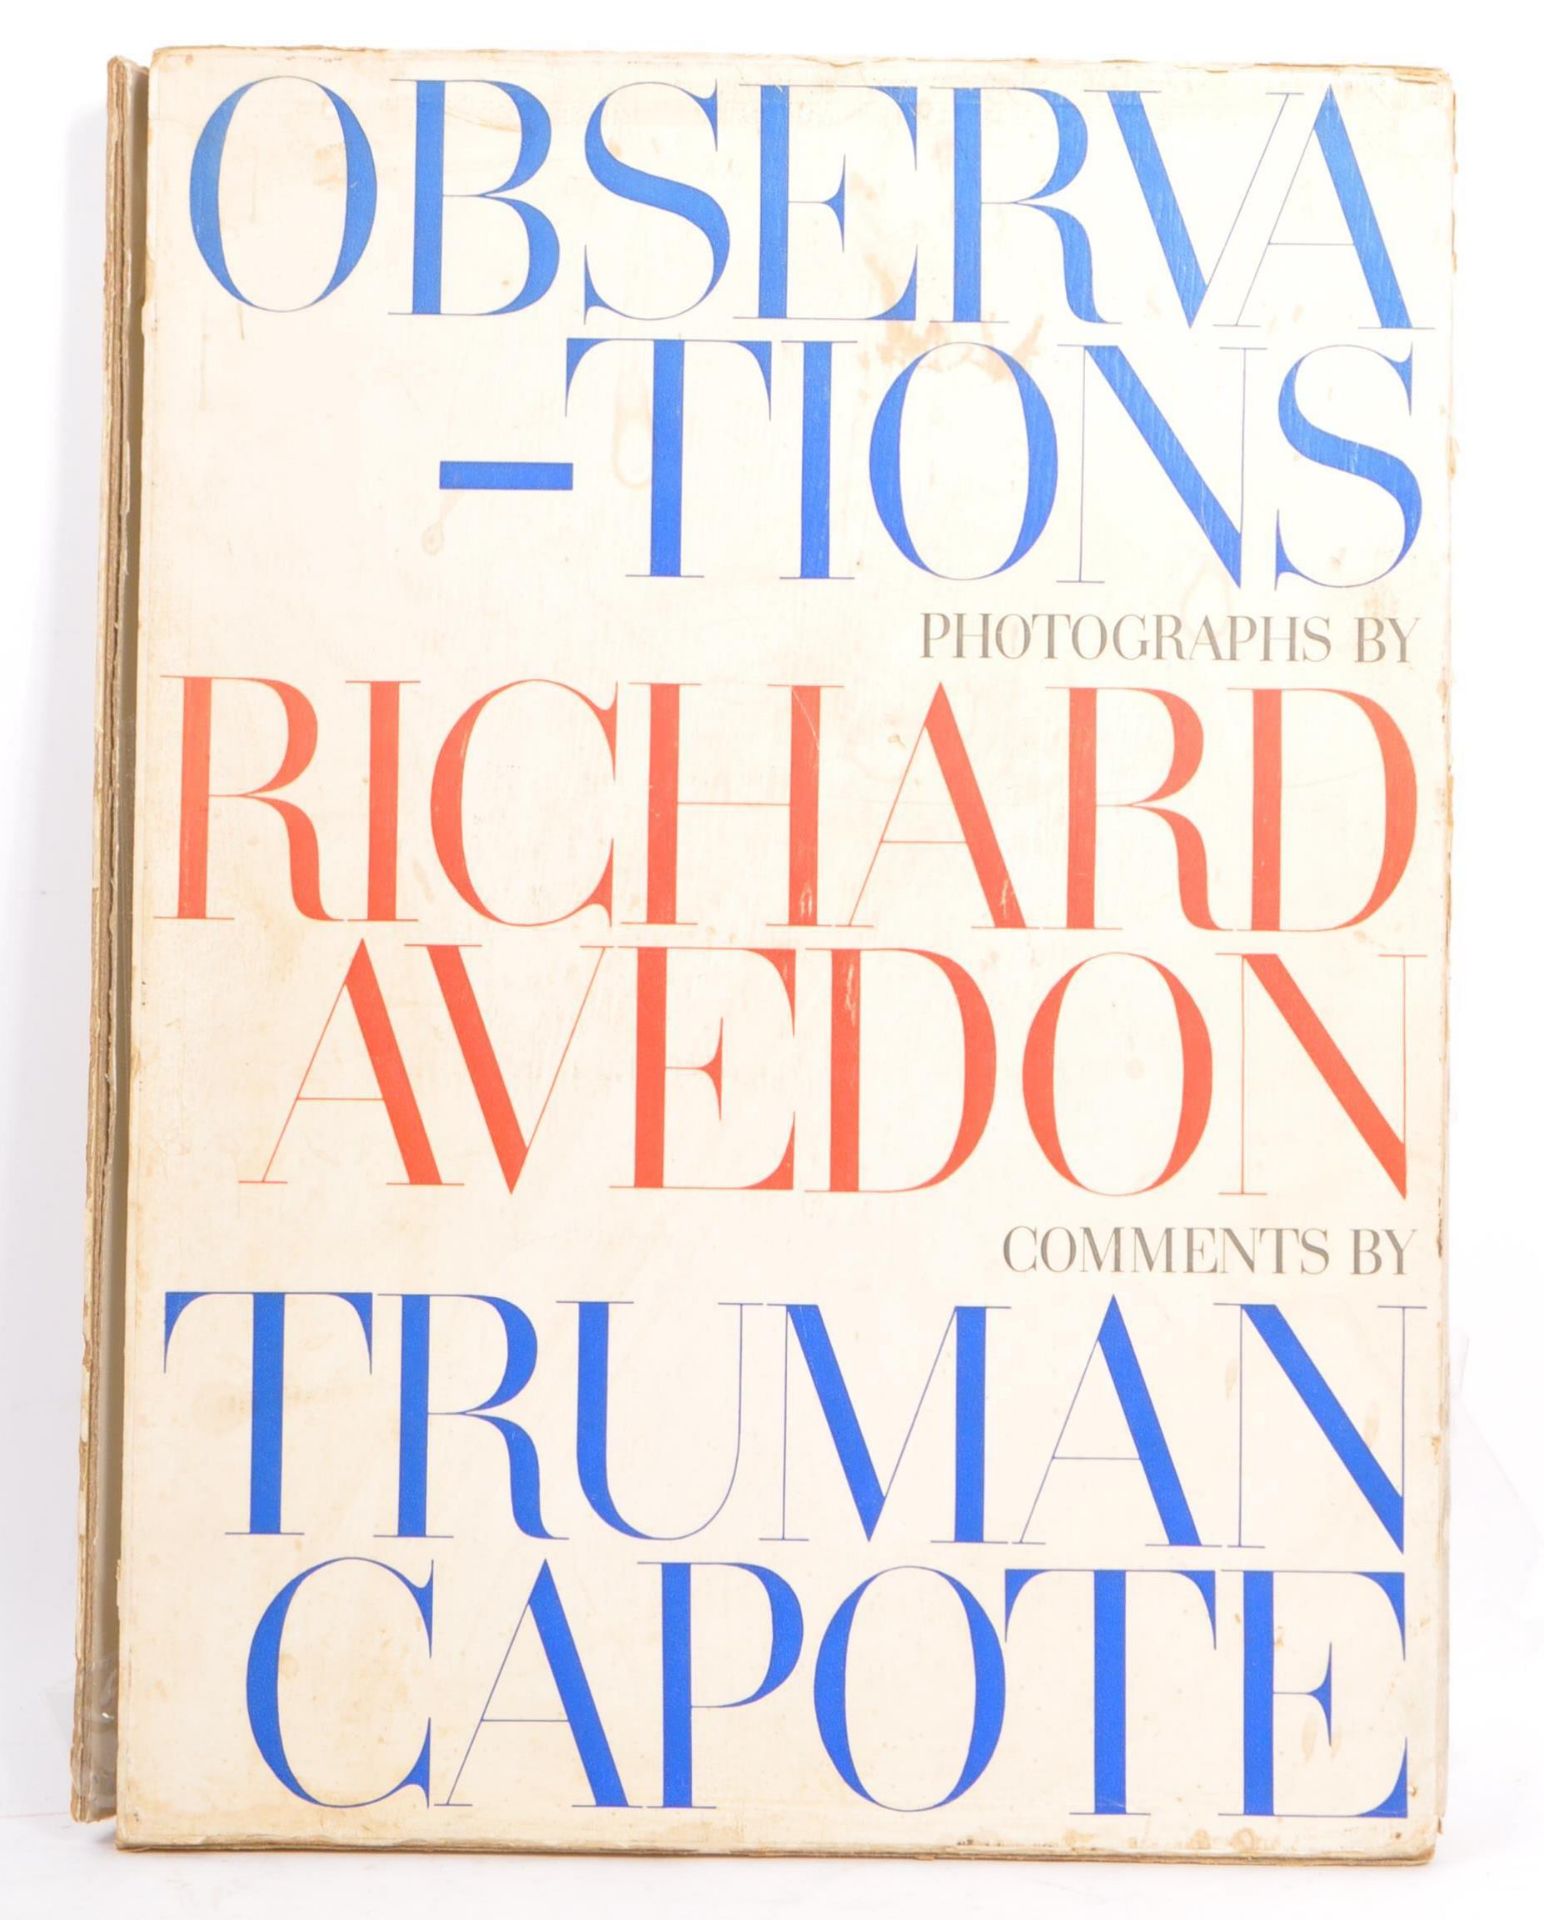 RICHARD AVEDON TRUMAN CAPOTE OBSERVATIONS PHOTOGRAPHY BOOK